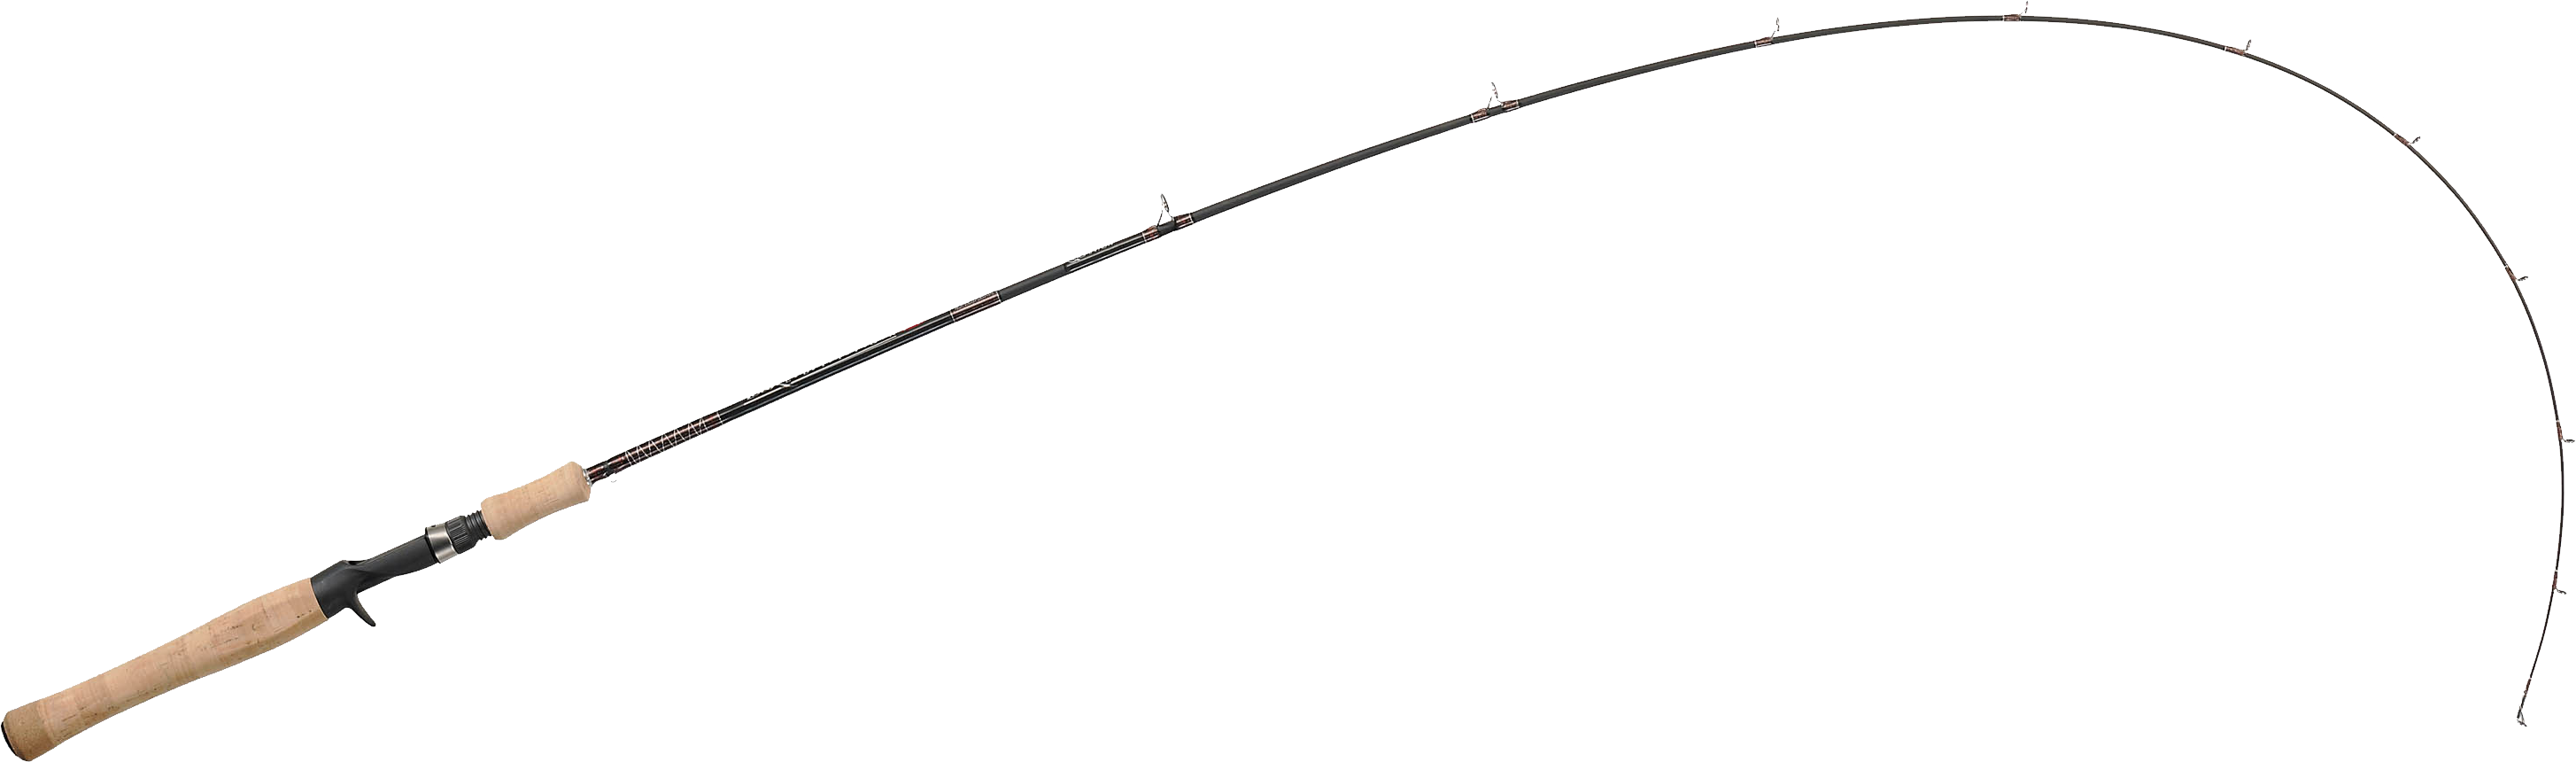 Fishing Pole PNG Transparent Fishing Pole.PNG Images. | PlusPNG